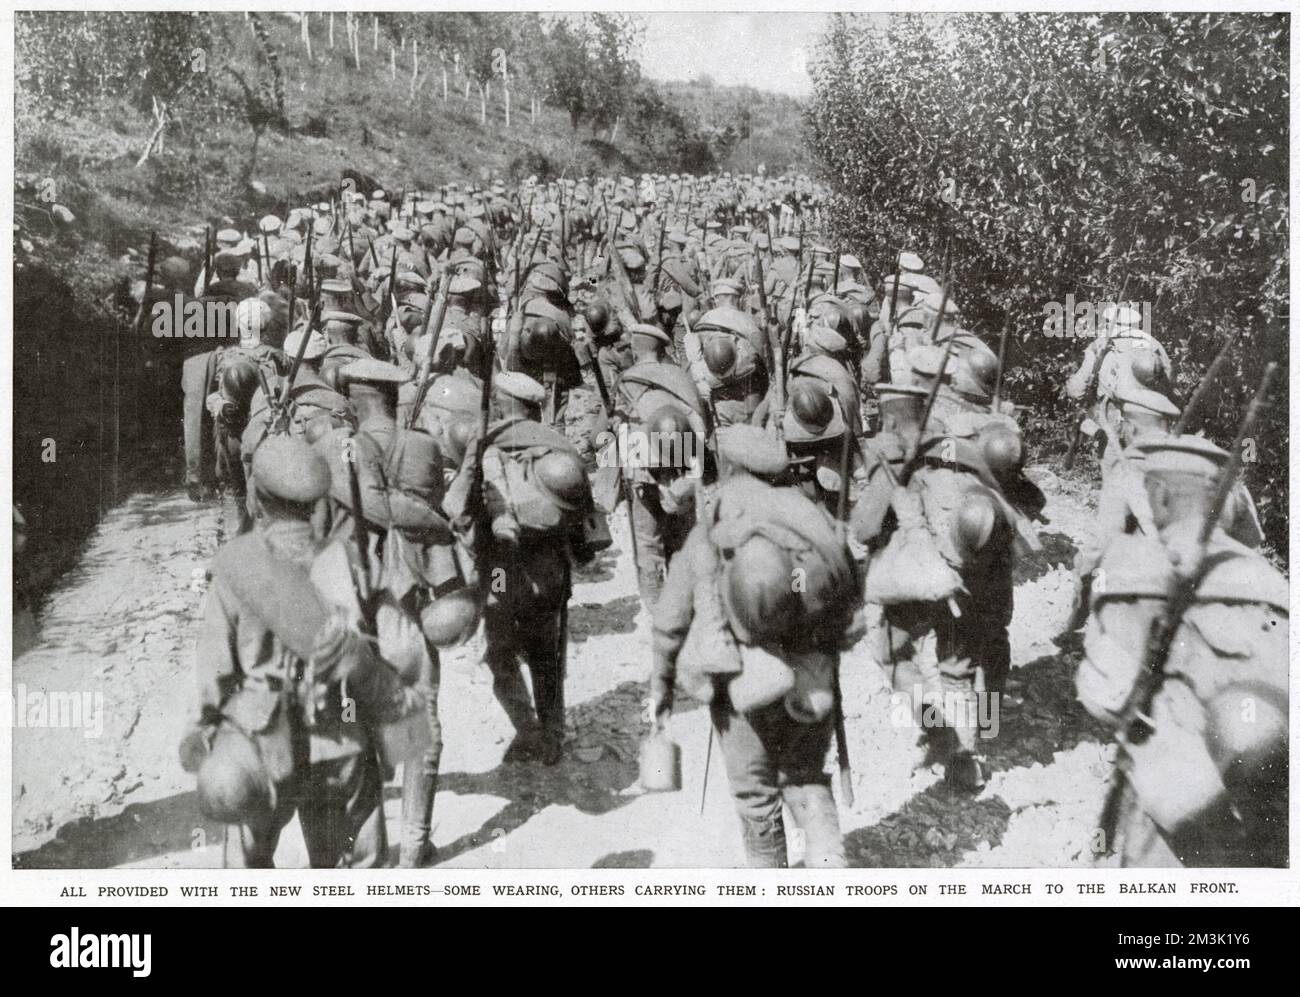 A large number of Russian infantry, equipped with only recently introduced steel helmets, are shown marching towards the Balkan front. The soldiers are reported to have arrived at the Allied encampment at Salonika, Greece on the 9th October 1916. Stock Photo